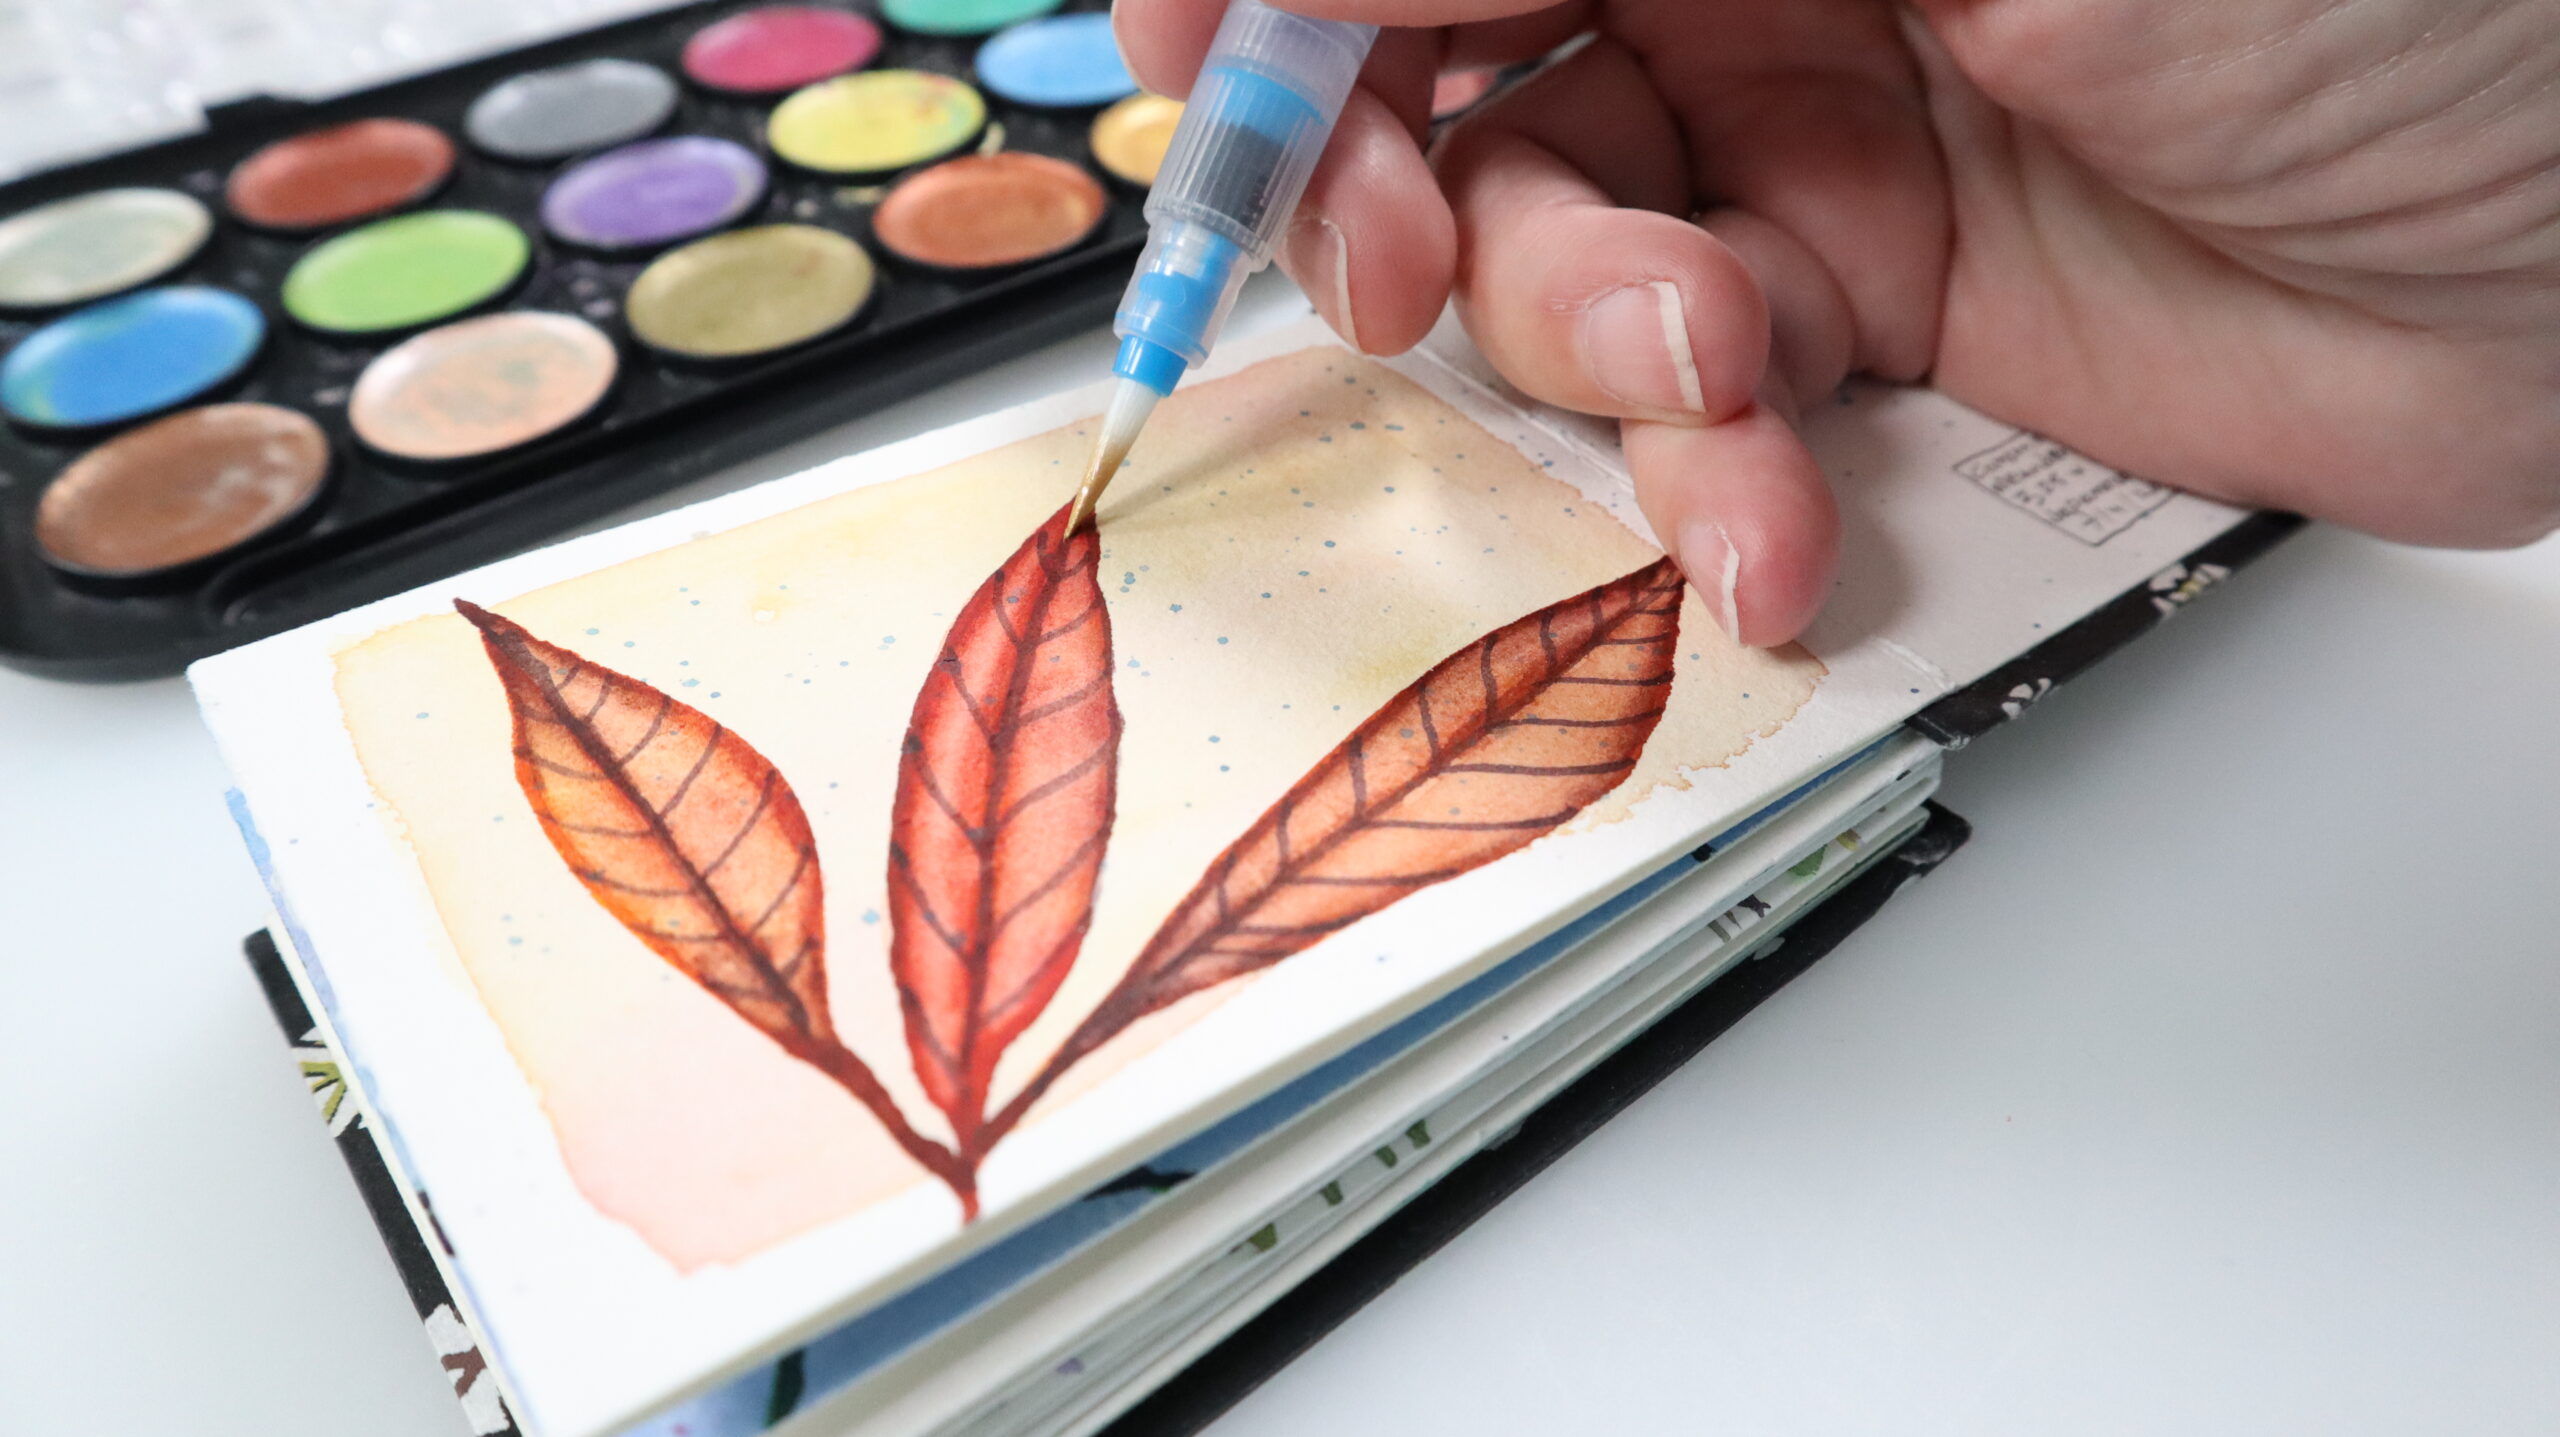 How to Use a Waterbrush for Watercolor Painting